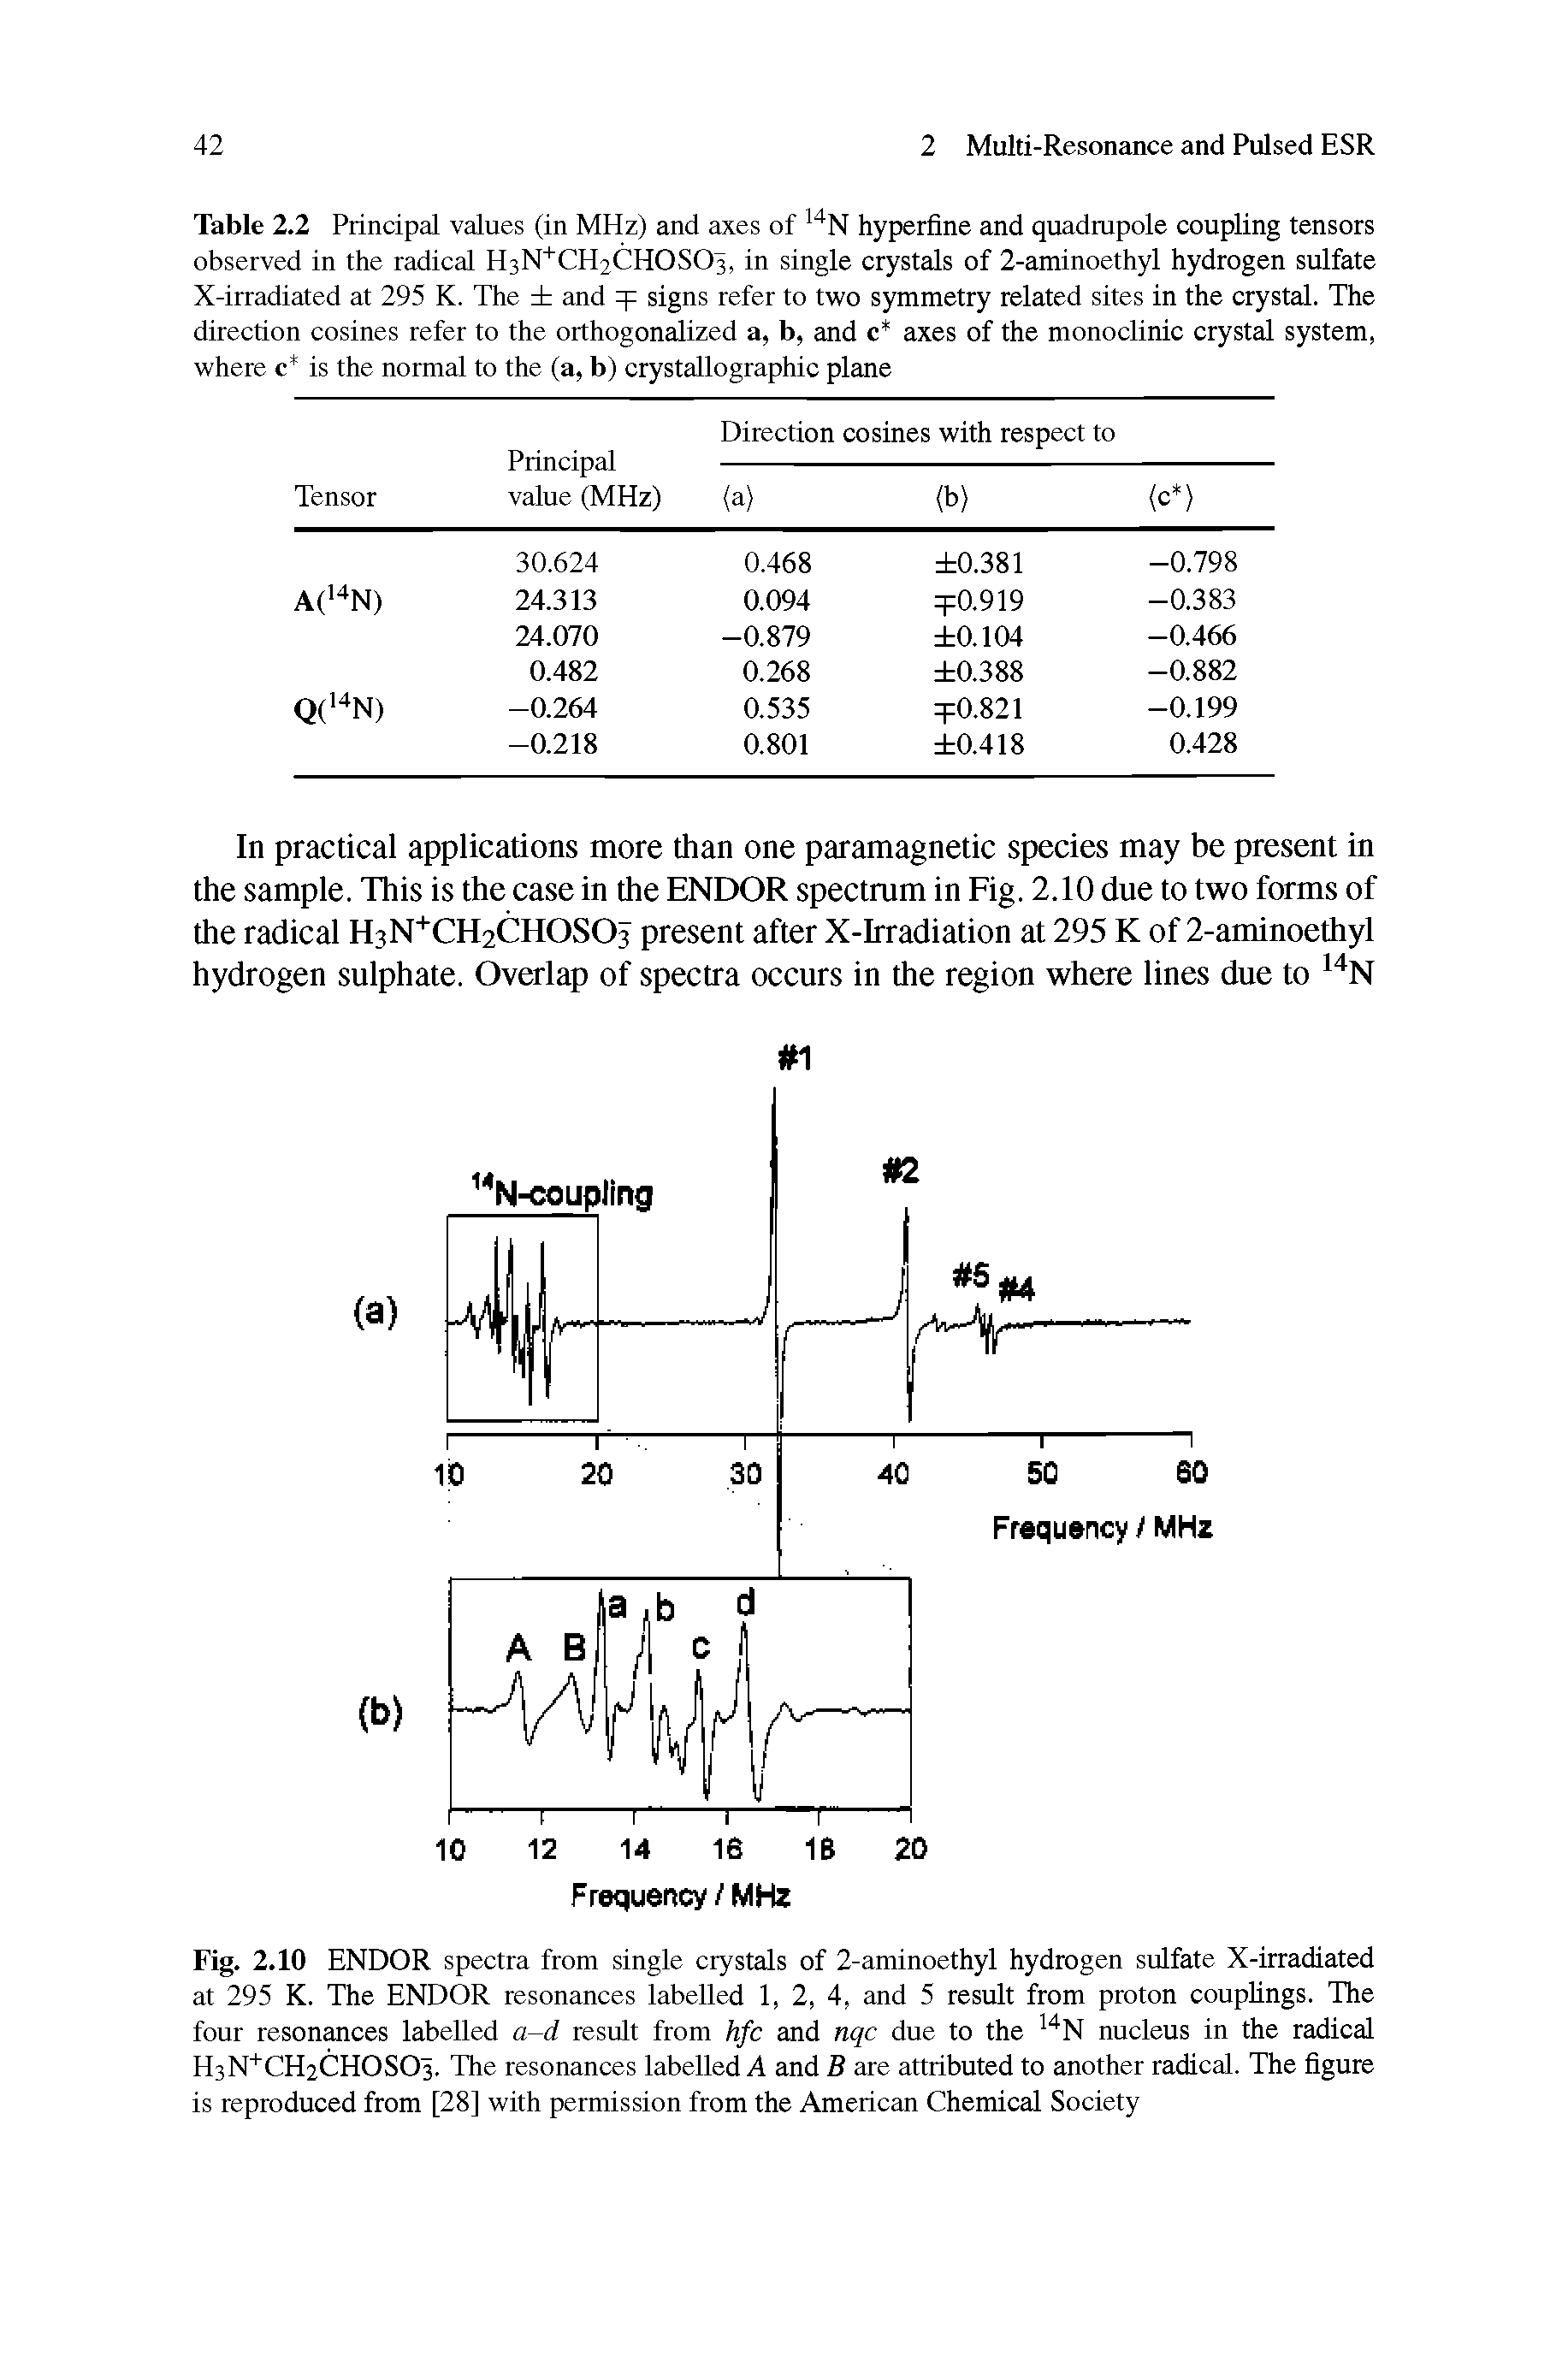 Fig. 2.10 ENDOR spectra from single crystals of 2-aminoethyl hydrogen sulfate X-irradiated at 295 K. The ENDOR resonances labelled 1, 2, 4, and 5 result from proton couplings. The four resonances labelled a-d result from hfc and nqc due to the N nucleus in the radical H3N" CH2CH0S03. The resonances labelled A and B are attributed to another radical. The figure is reproduced from [28] with permission from the American Chemical Society...